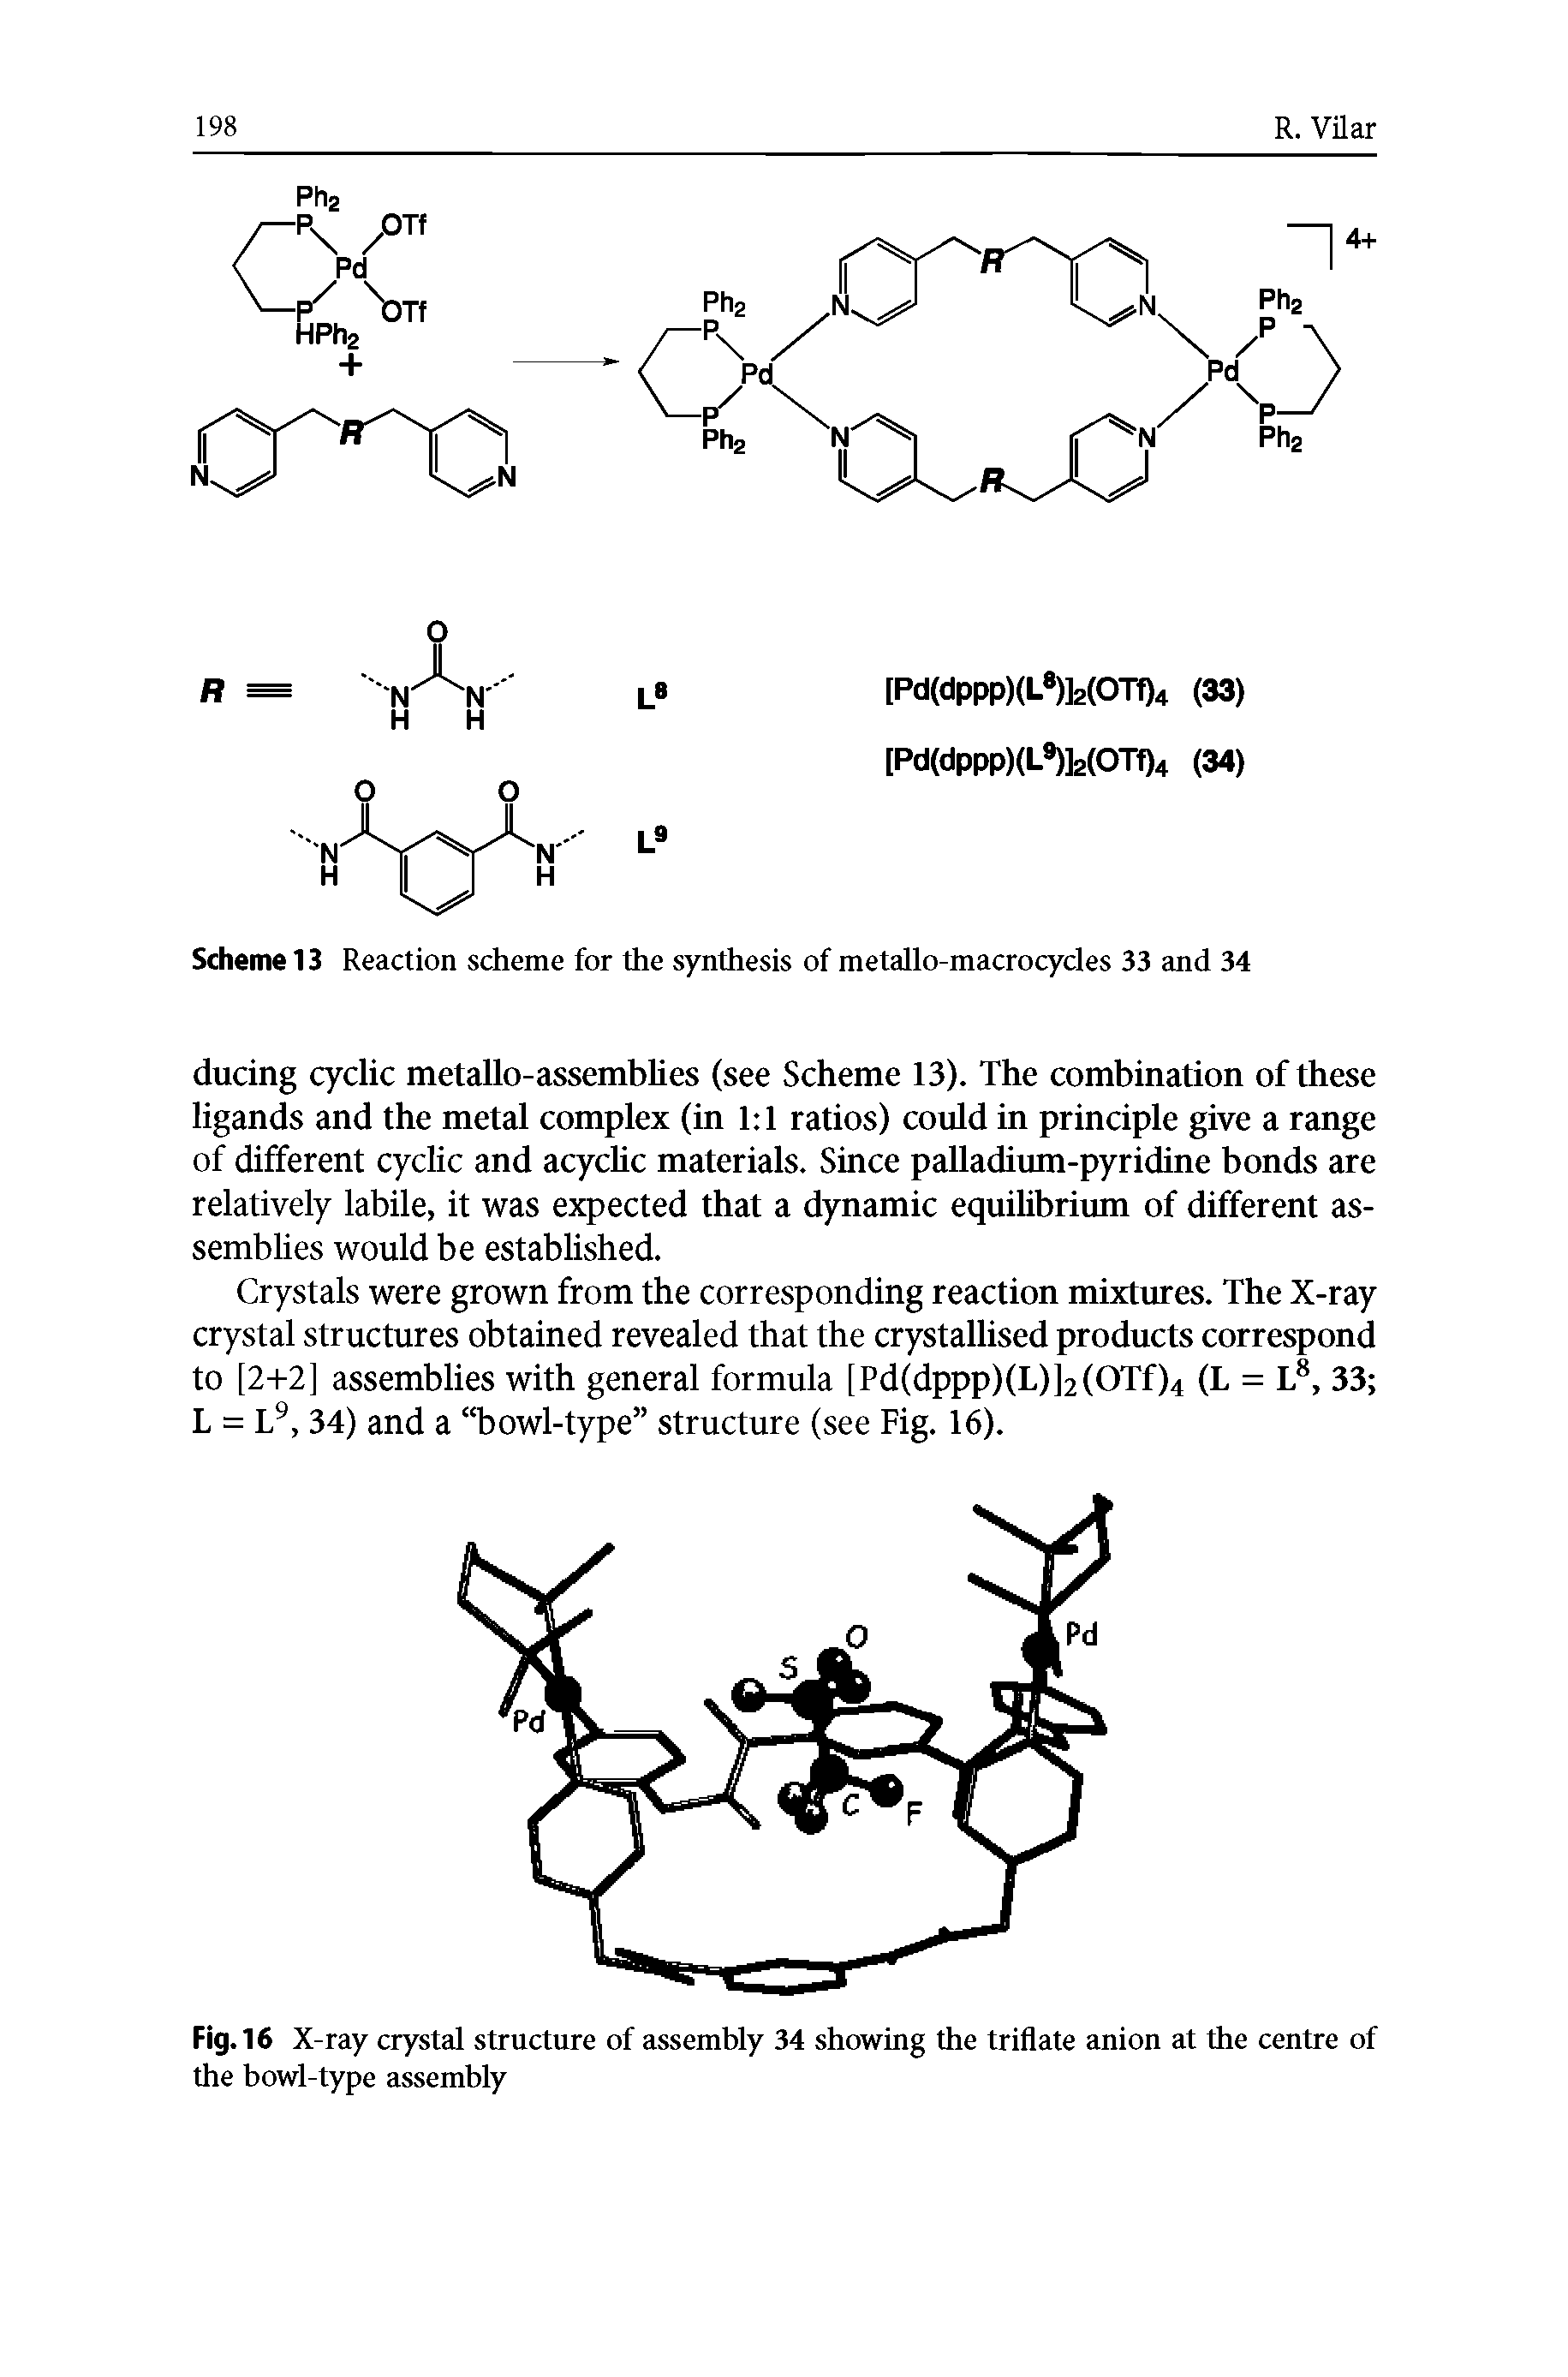 Scheme 13 Reaction scheme for the synthesis of metallo-macrocycles 33 and 34...